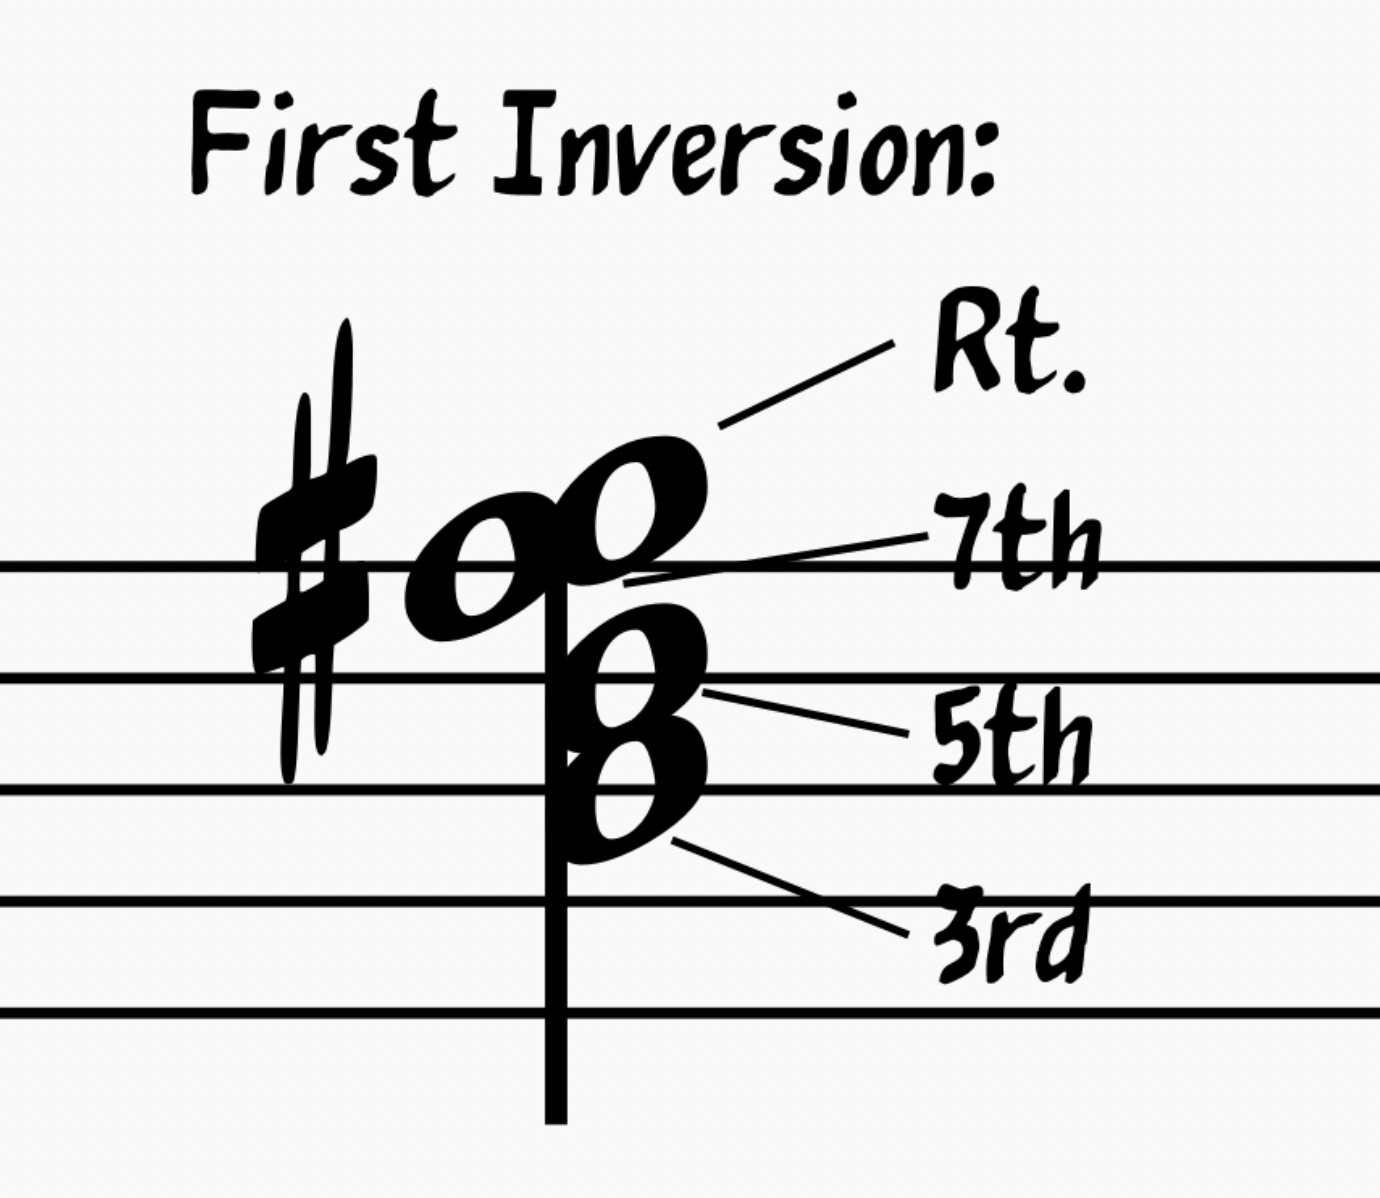 First Inversion G Major 7th chord